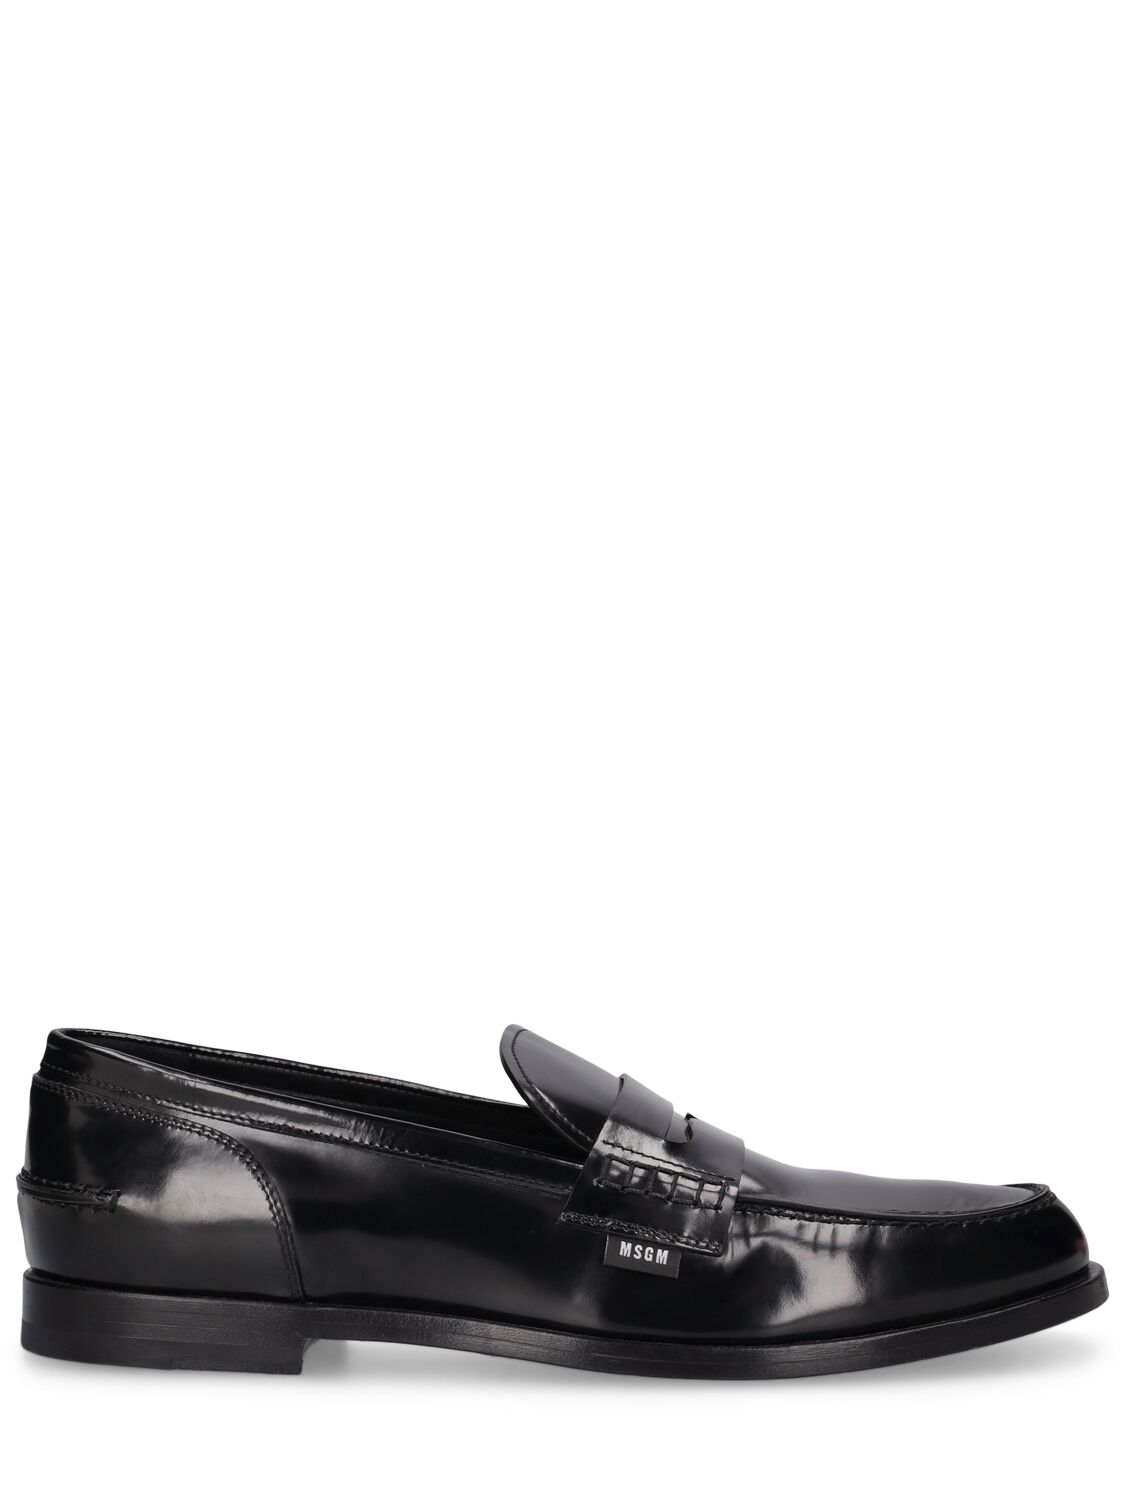 Msgm Leather Loafers In Black